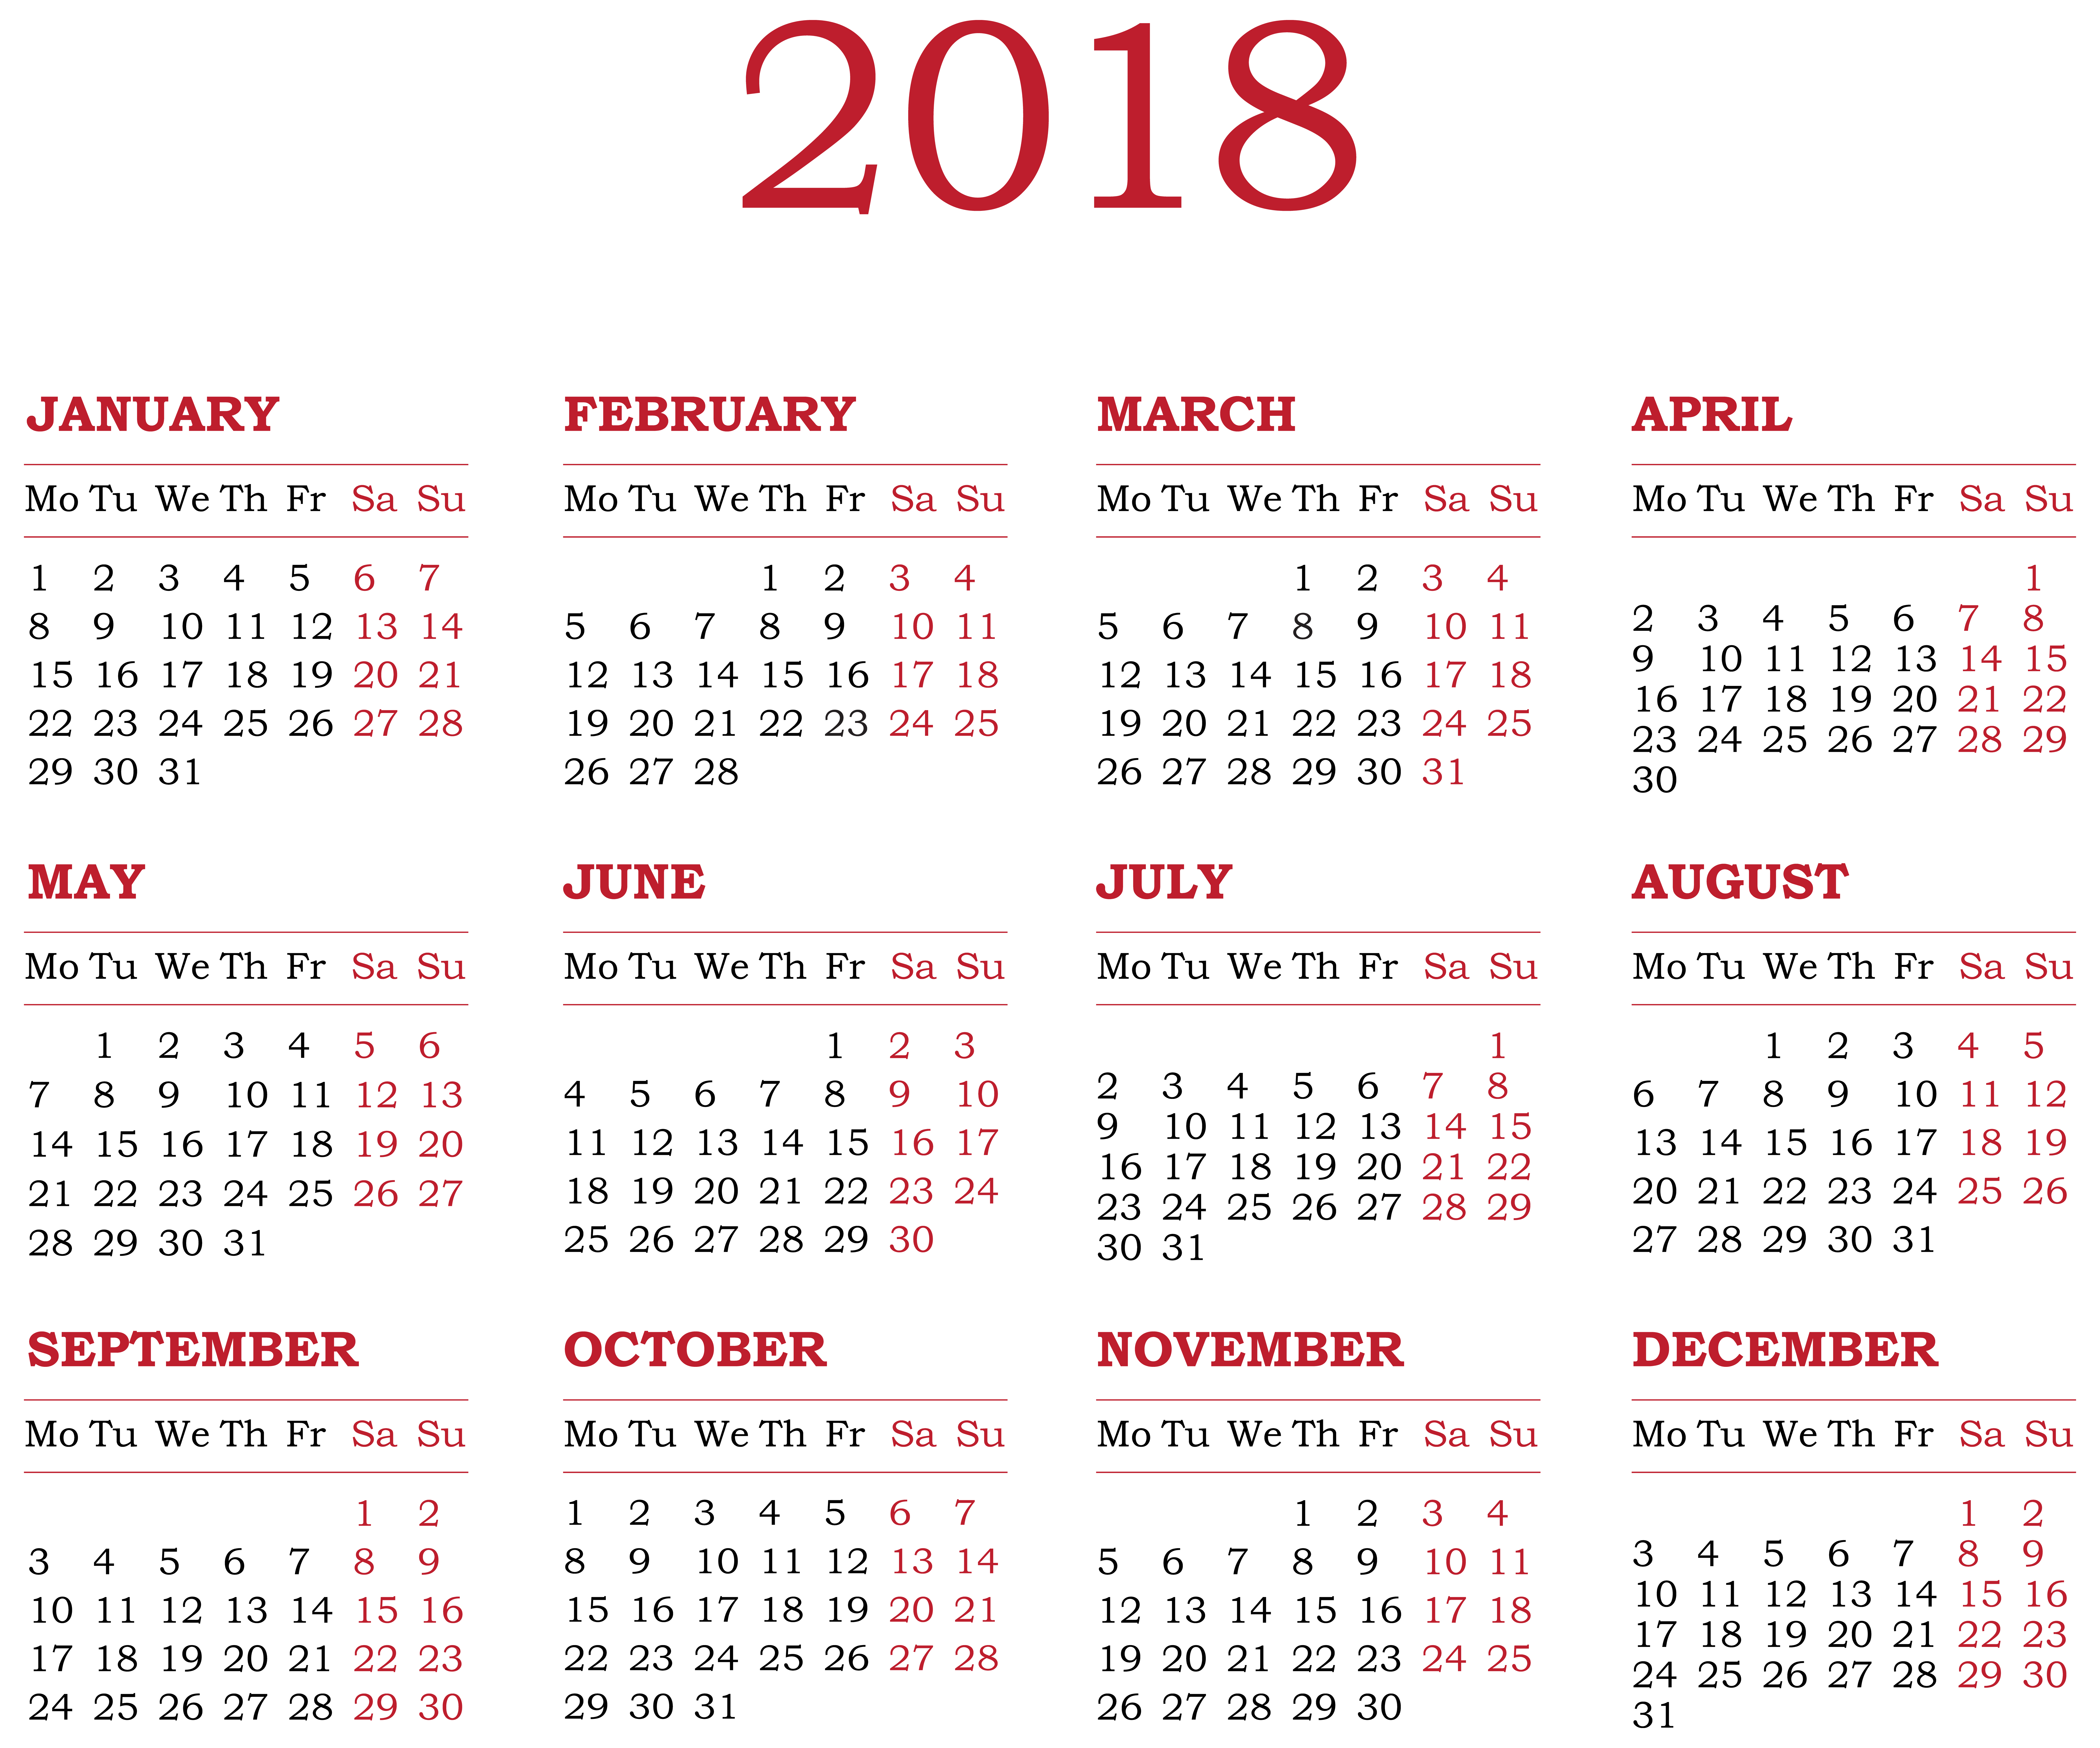 18 Calendar Transparent Png Clip Art Gallery Yopriceville High Quality Free Images And Transparent Png Clipart